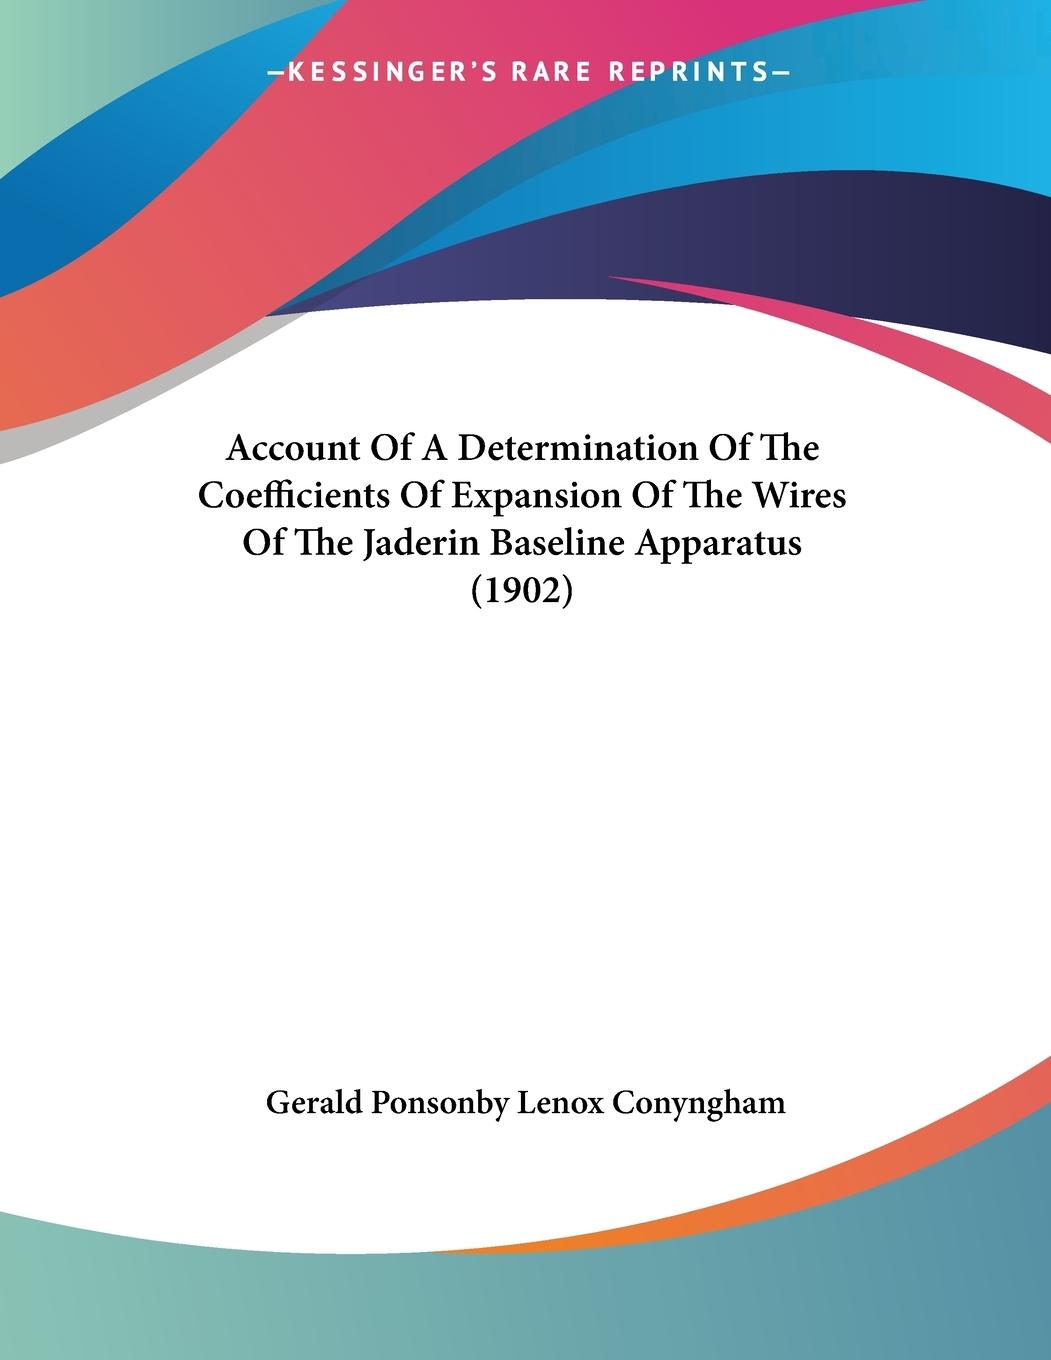 Account Of A Determination Of The Coefficients Of Expansion Of The Wires Of The Jaderin Baseline Apparatus (1902) - Conyngham, Gerald Ponsonby Lenox